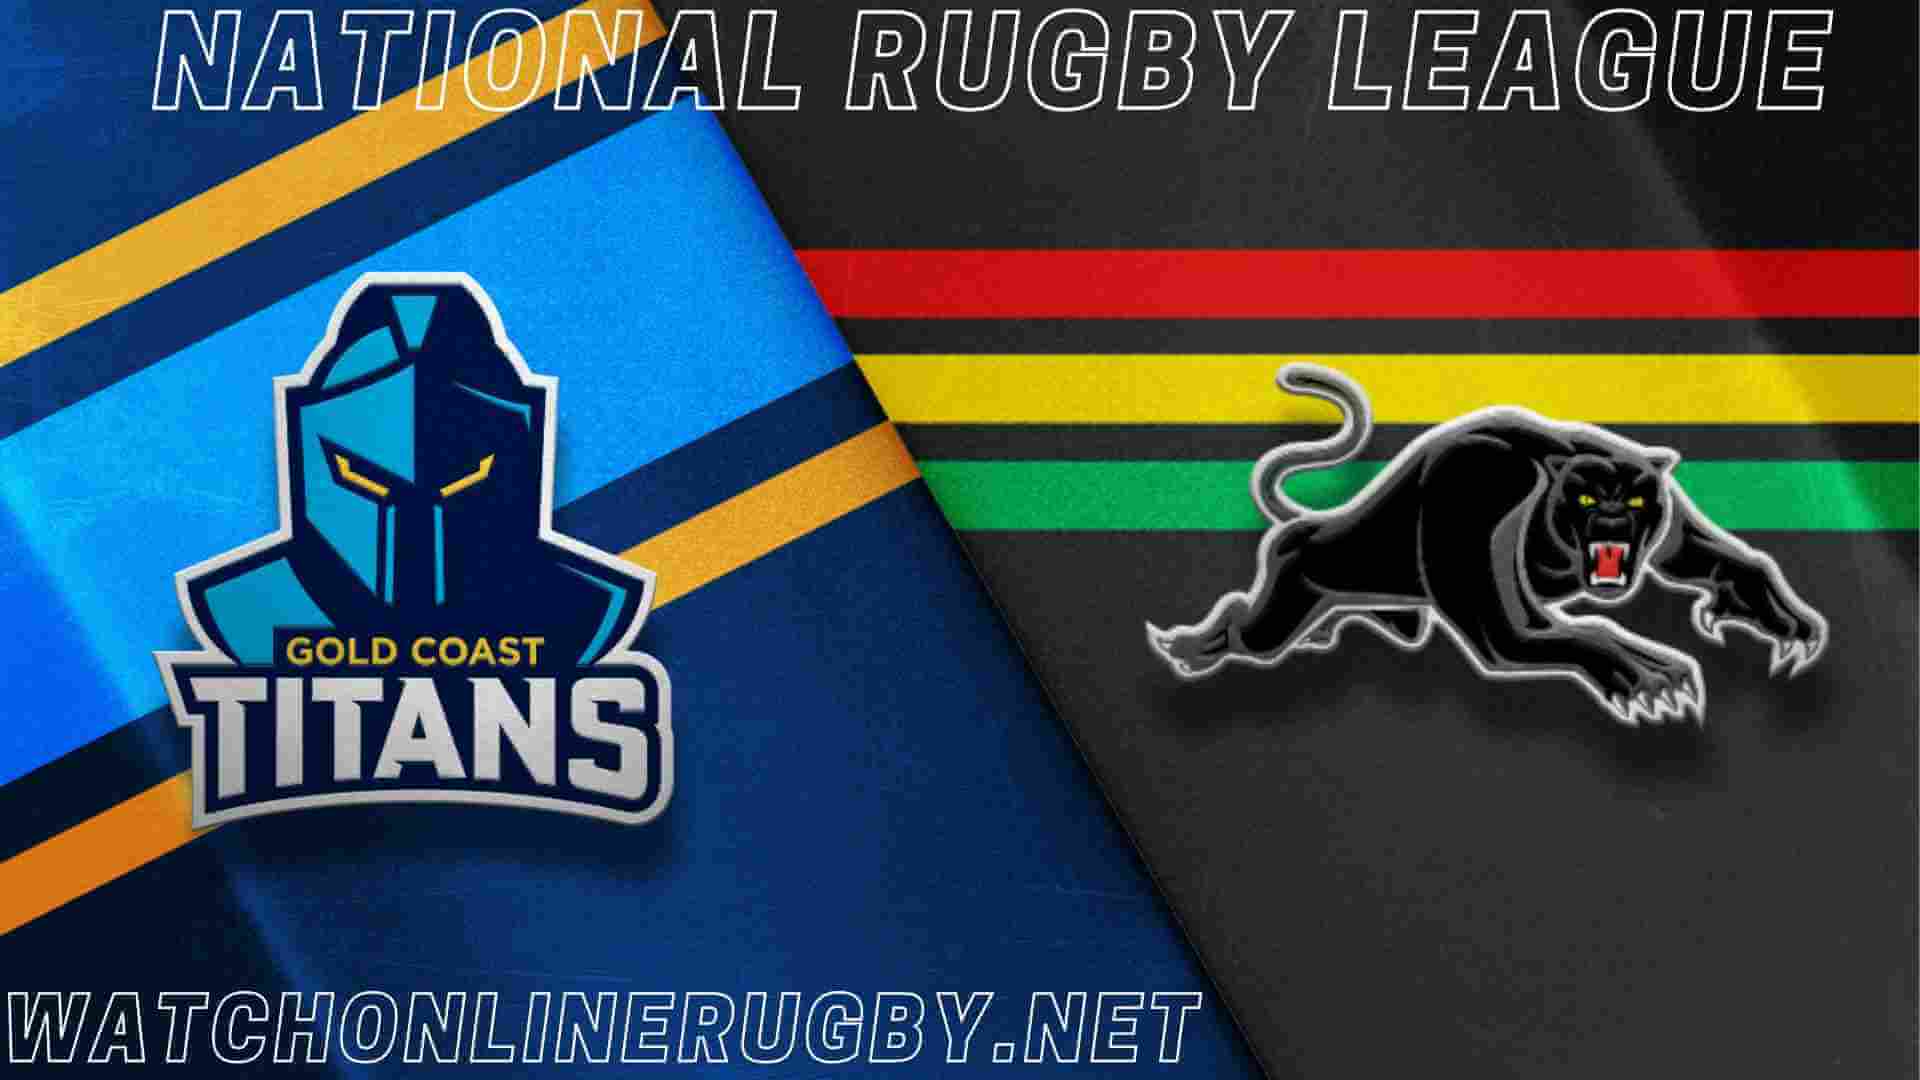 Titans VS Panthers 2018 Live NRL Streaming